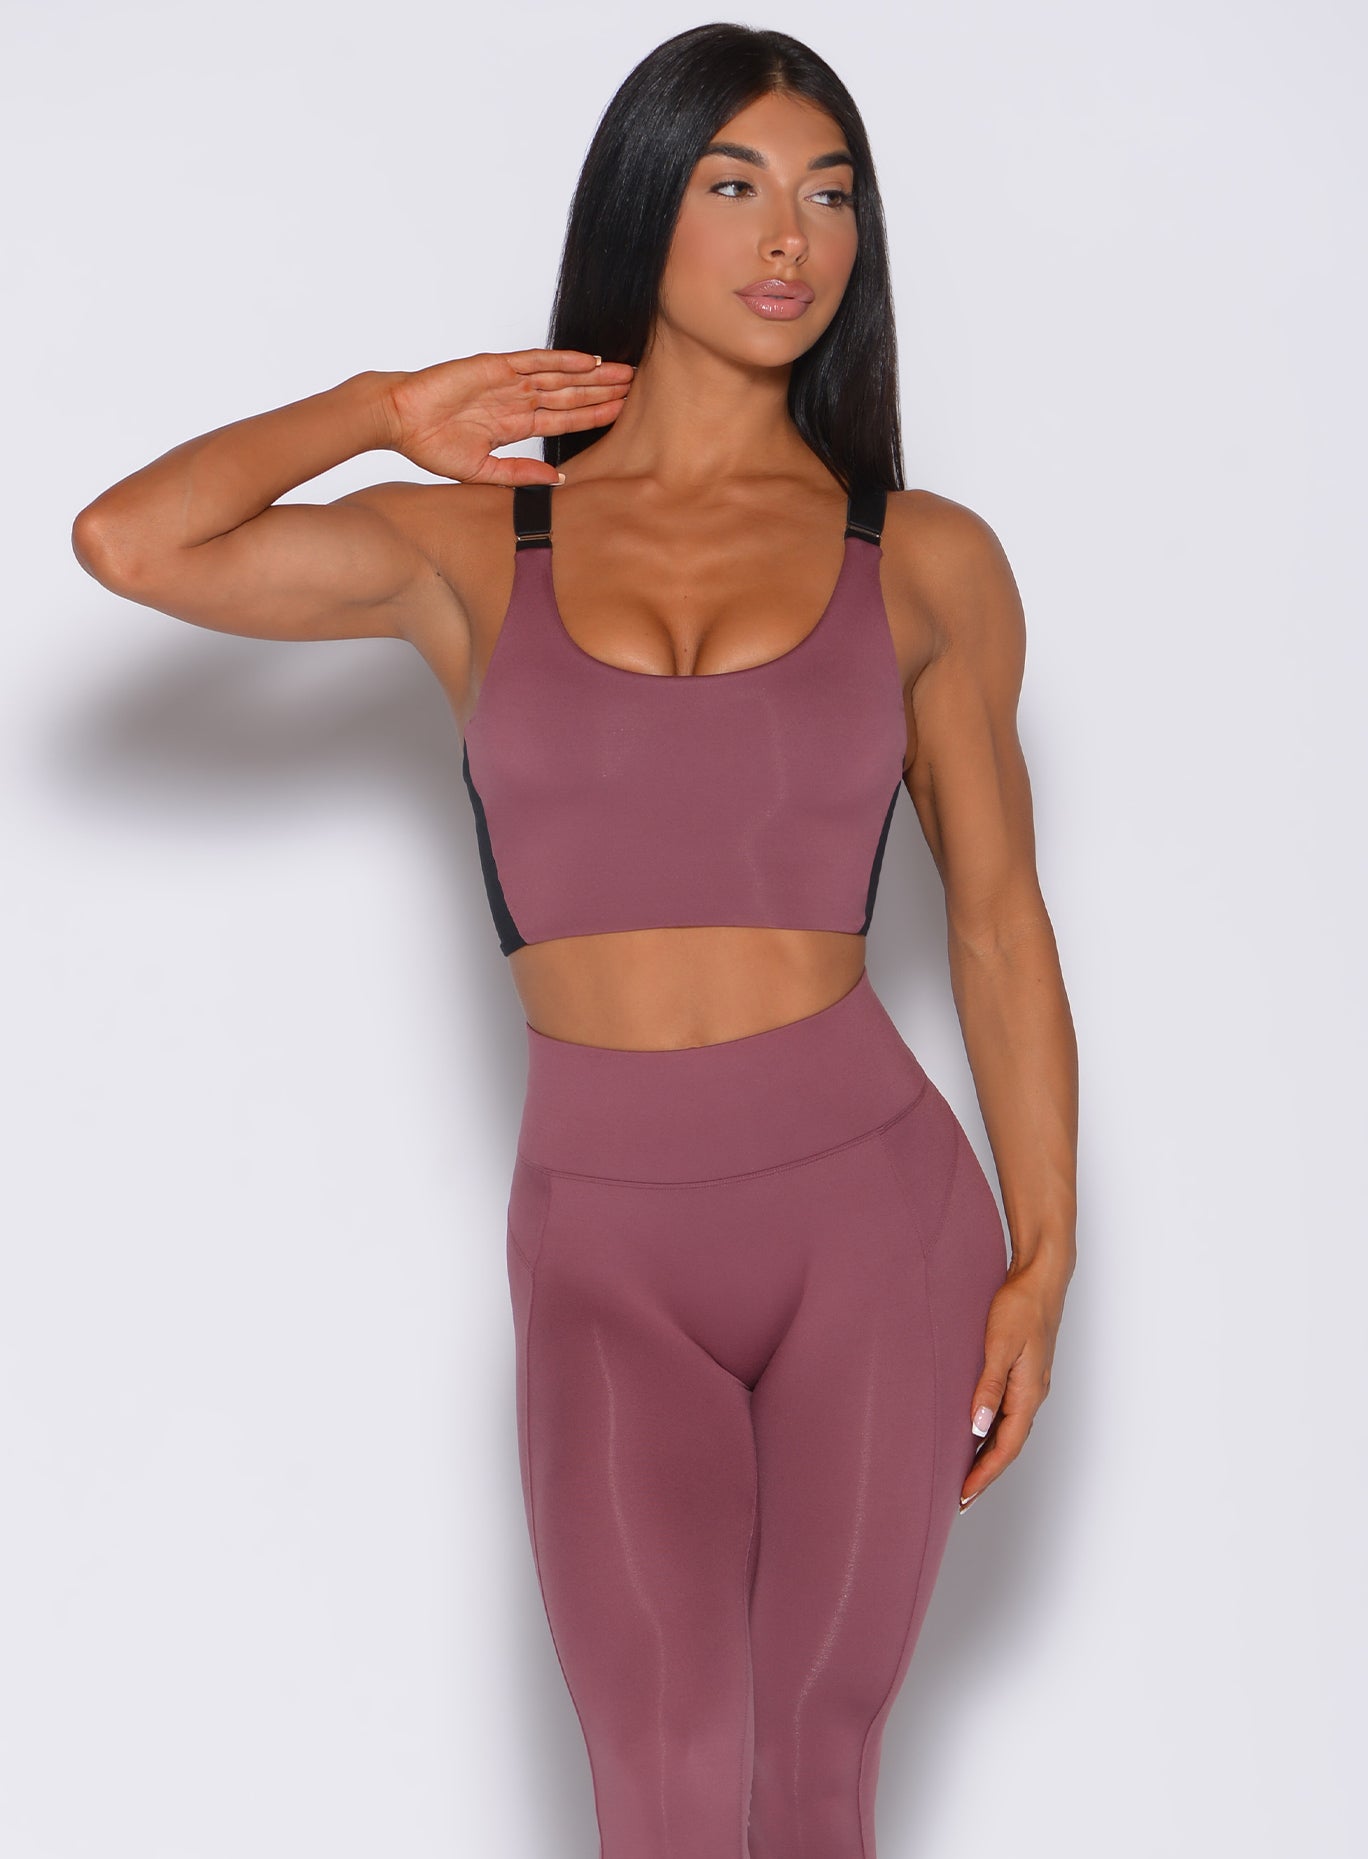 Front profile view of a model facing to her left wearing our banded sports bra in merlot color and a matching leggings